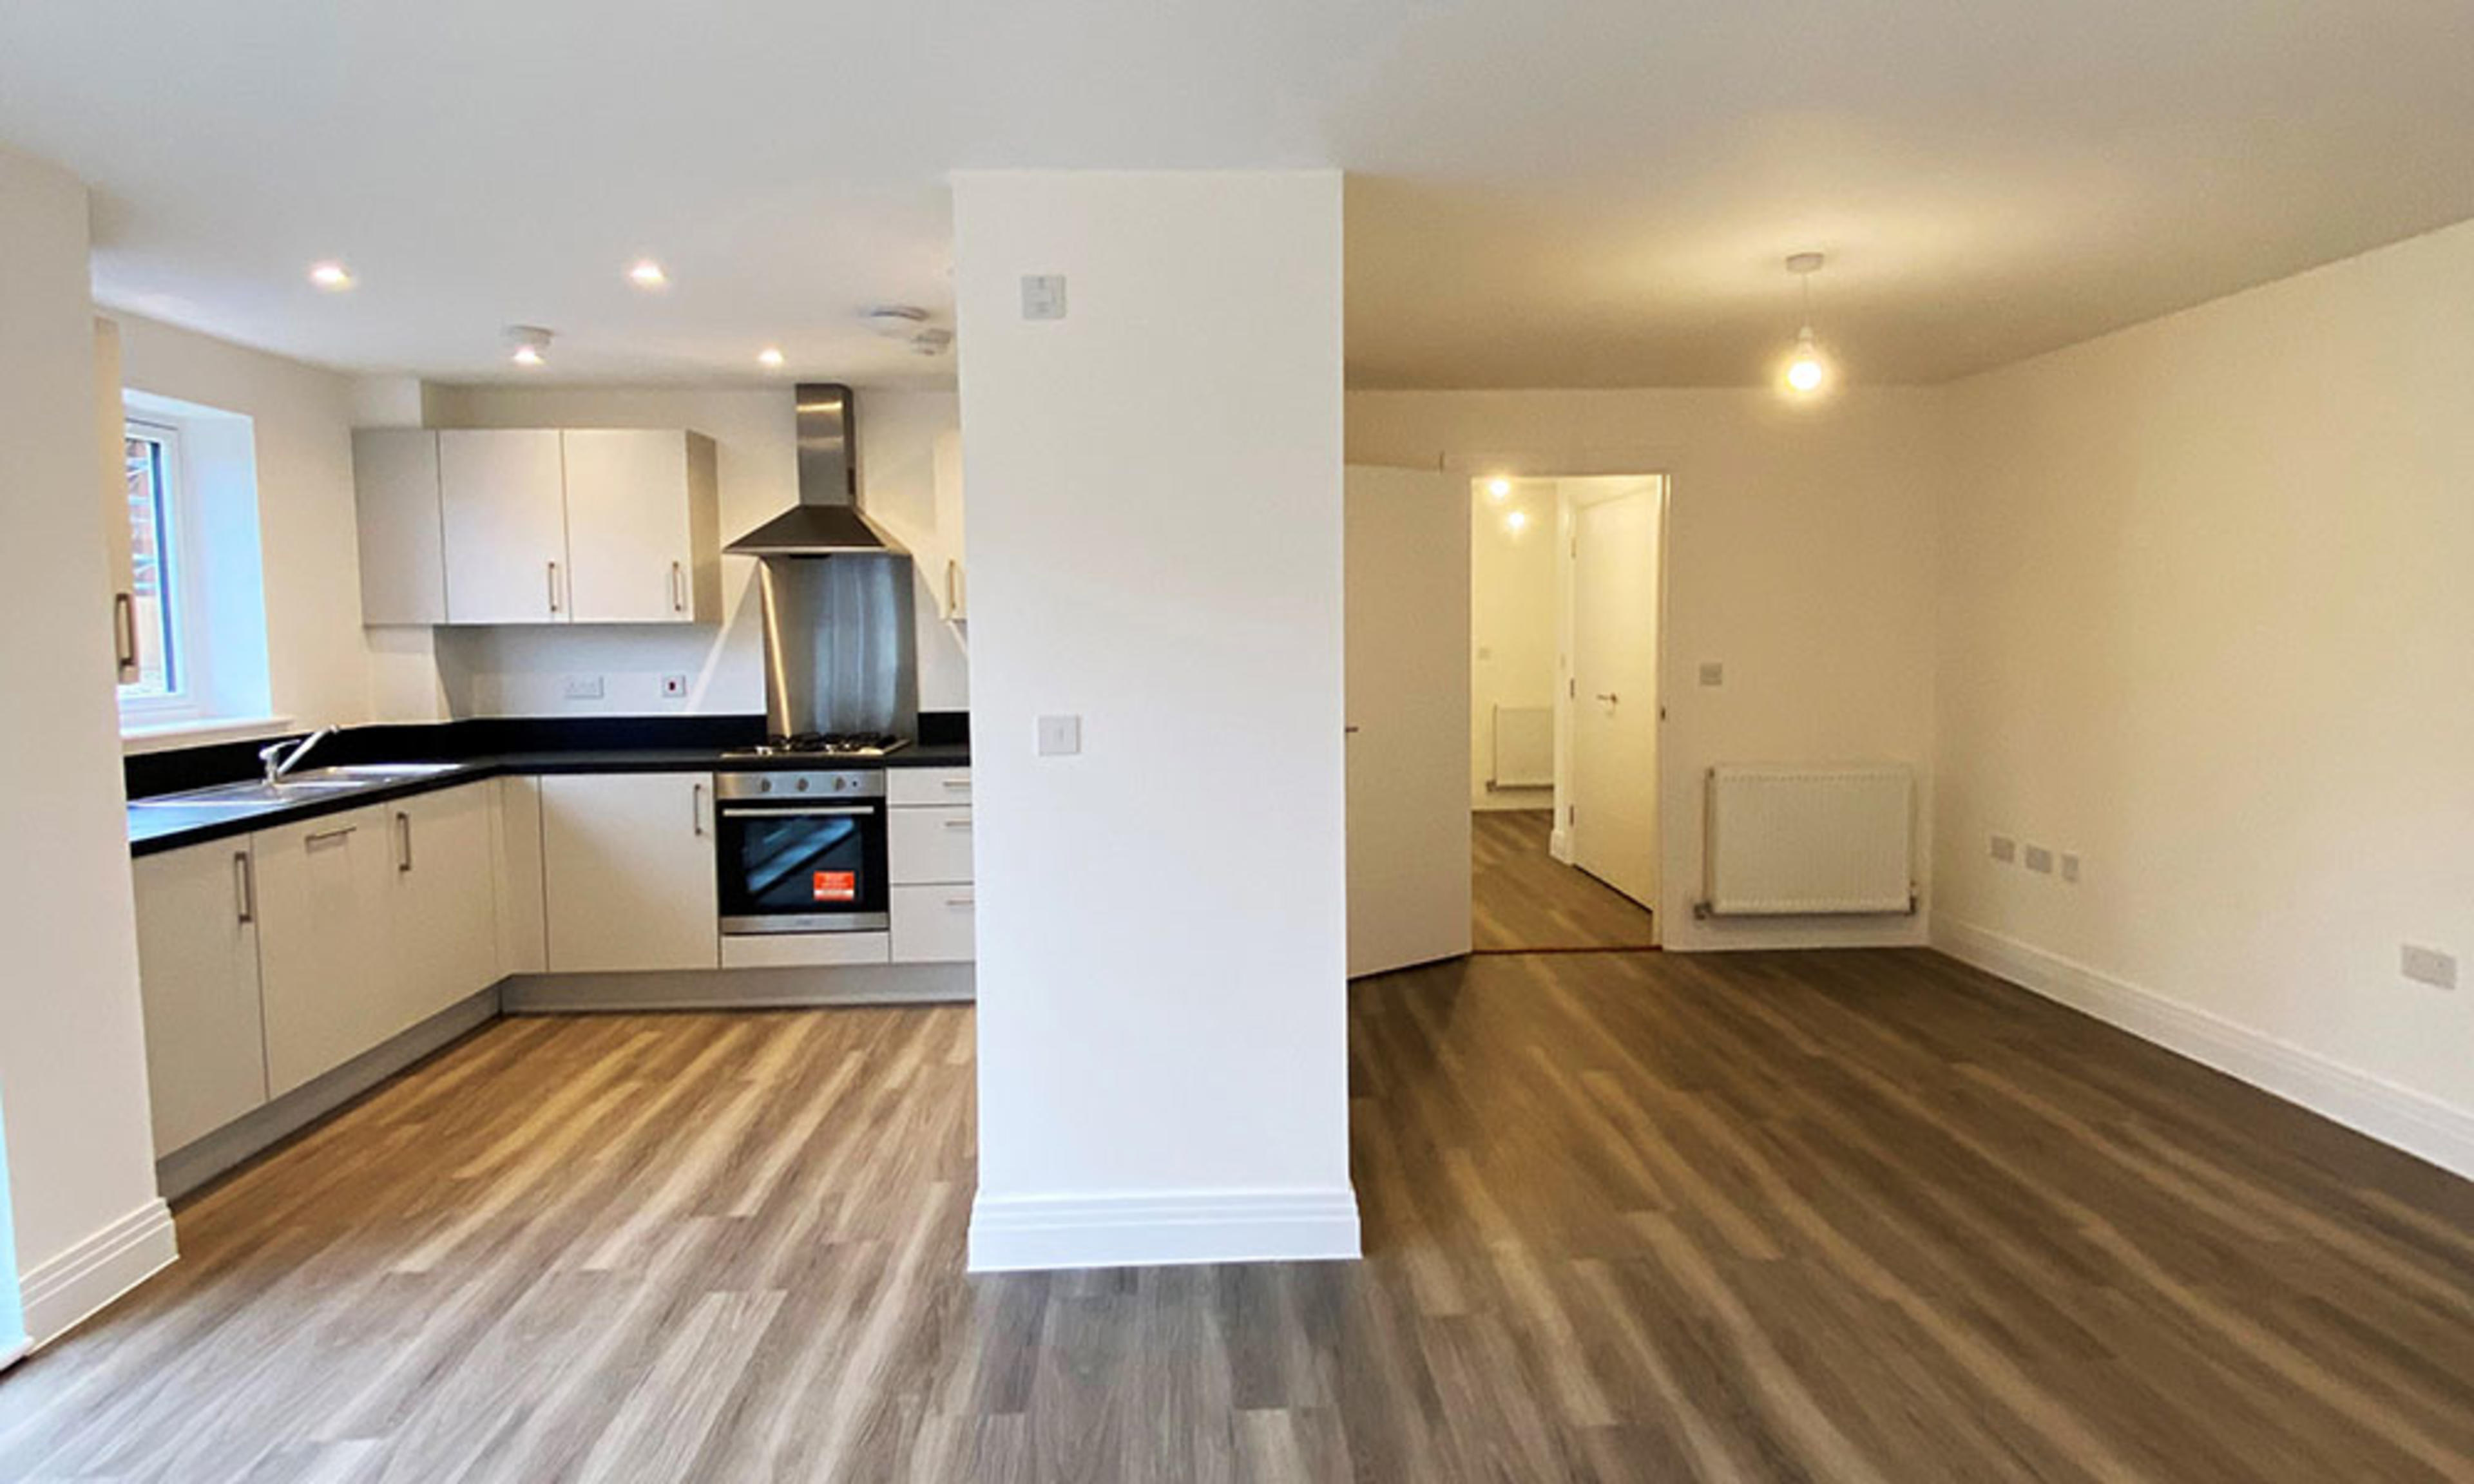 kings-barton-new-flats-for-sale-winchester-two-bedroom-kitchen-living-dining-room